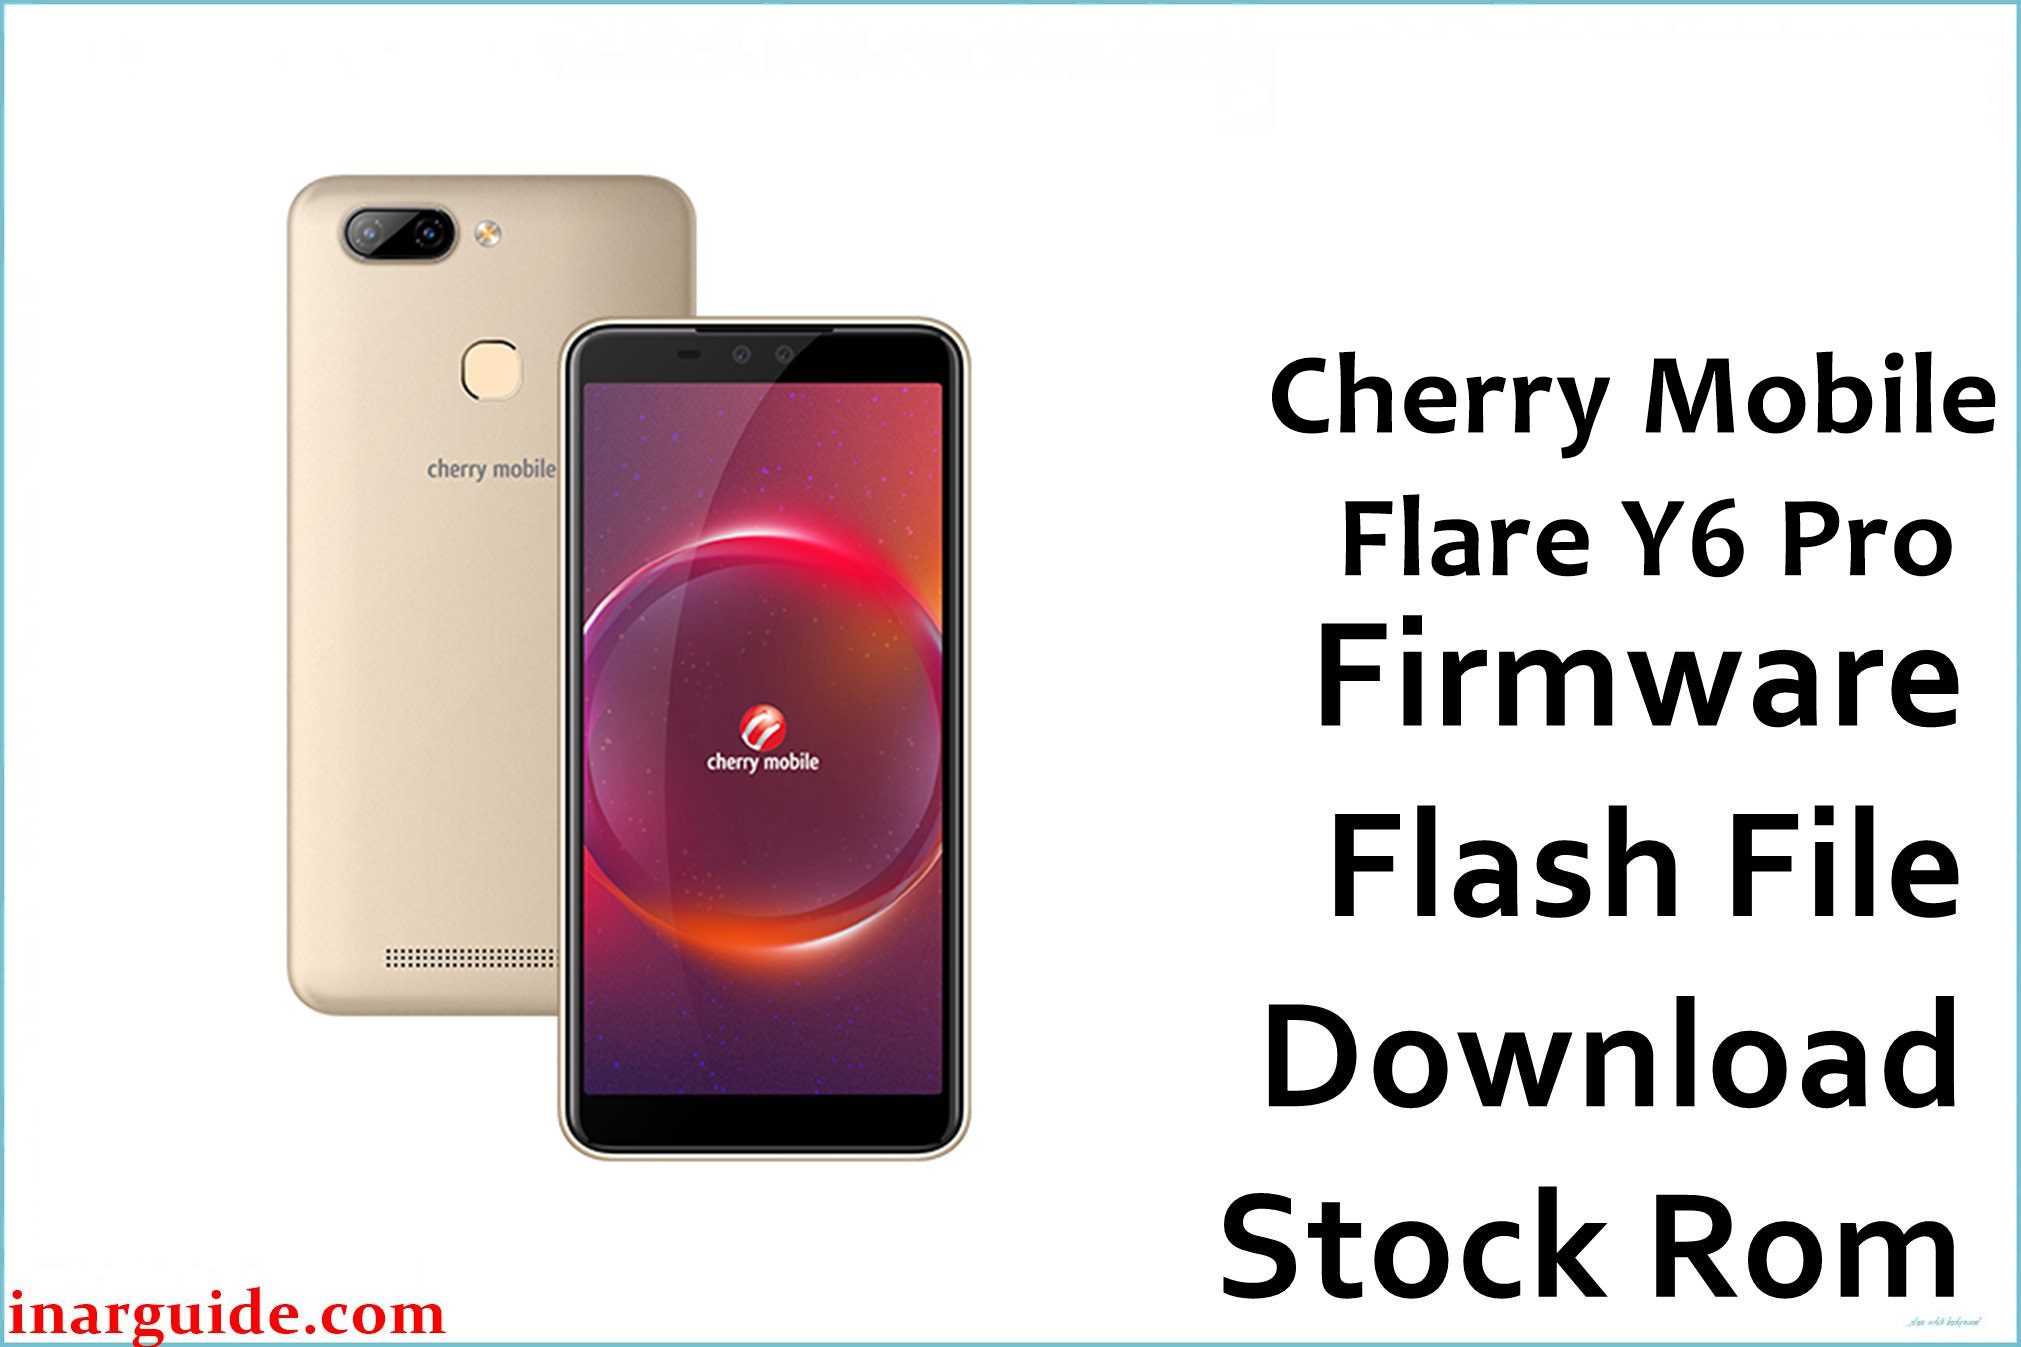 Cherry Mobile Flare Y6 Pro